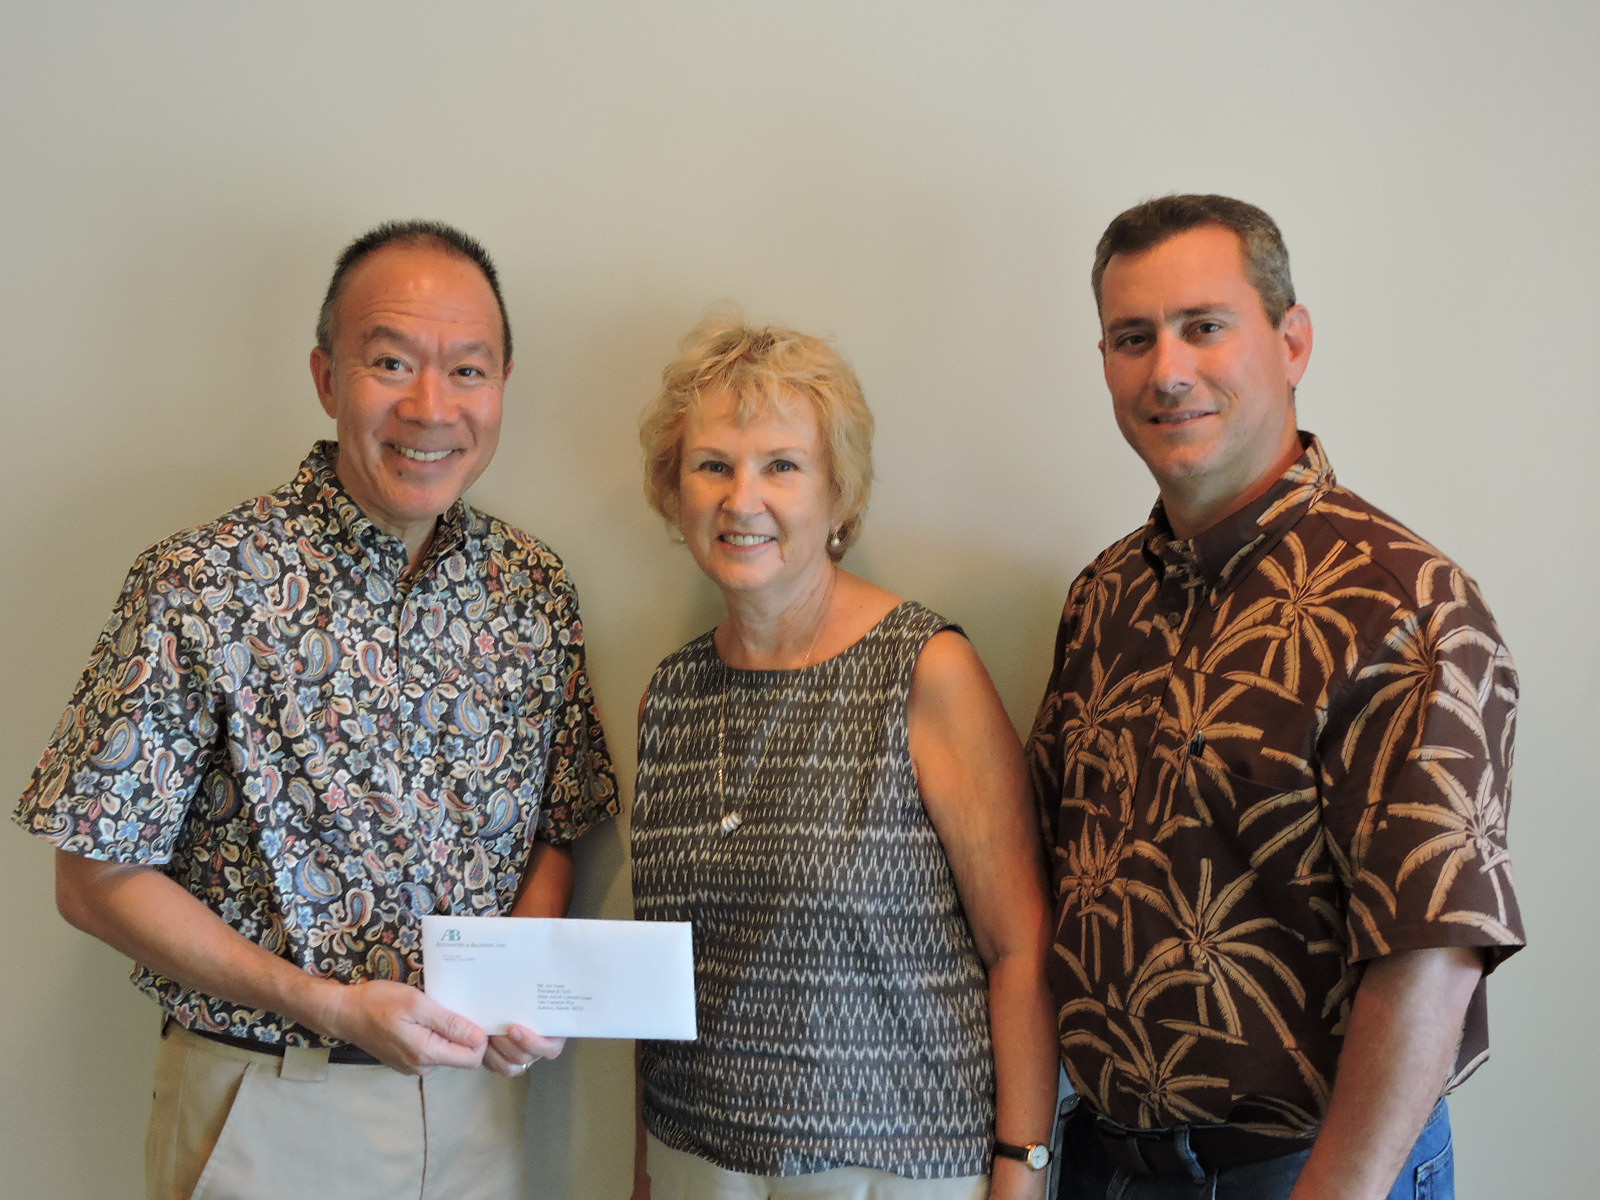 Susana Browne of MACC with Grant Y.M. Chun (A&B Properties) left, and Rick Volner, Jr. (HC&S). Alexander & Baldwin has given $10,000 to support Maui Arts & Cultural Center’s “CanDo! Days” - a well-known and much-loved facet of The MACC’s overall arts education program. Arts education at The MACC extends the learning potential of more than 10,000 Maui County students annually.